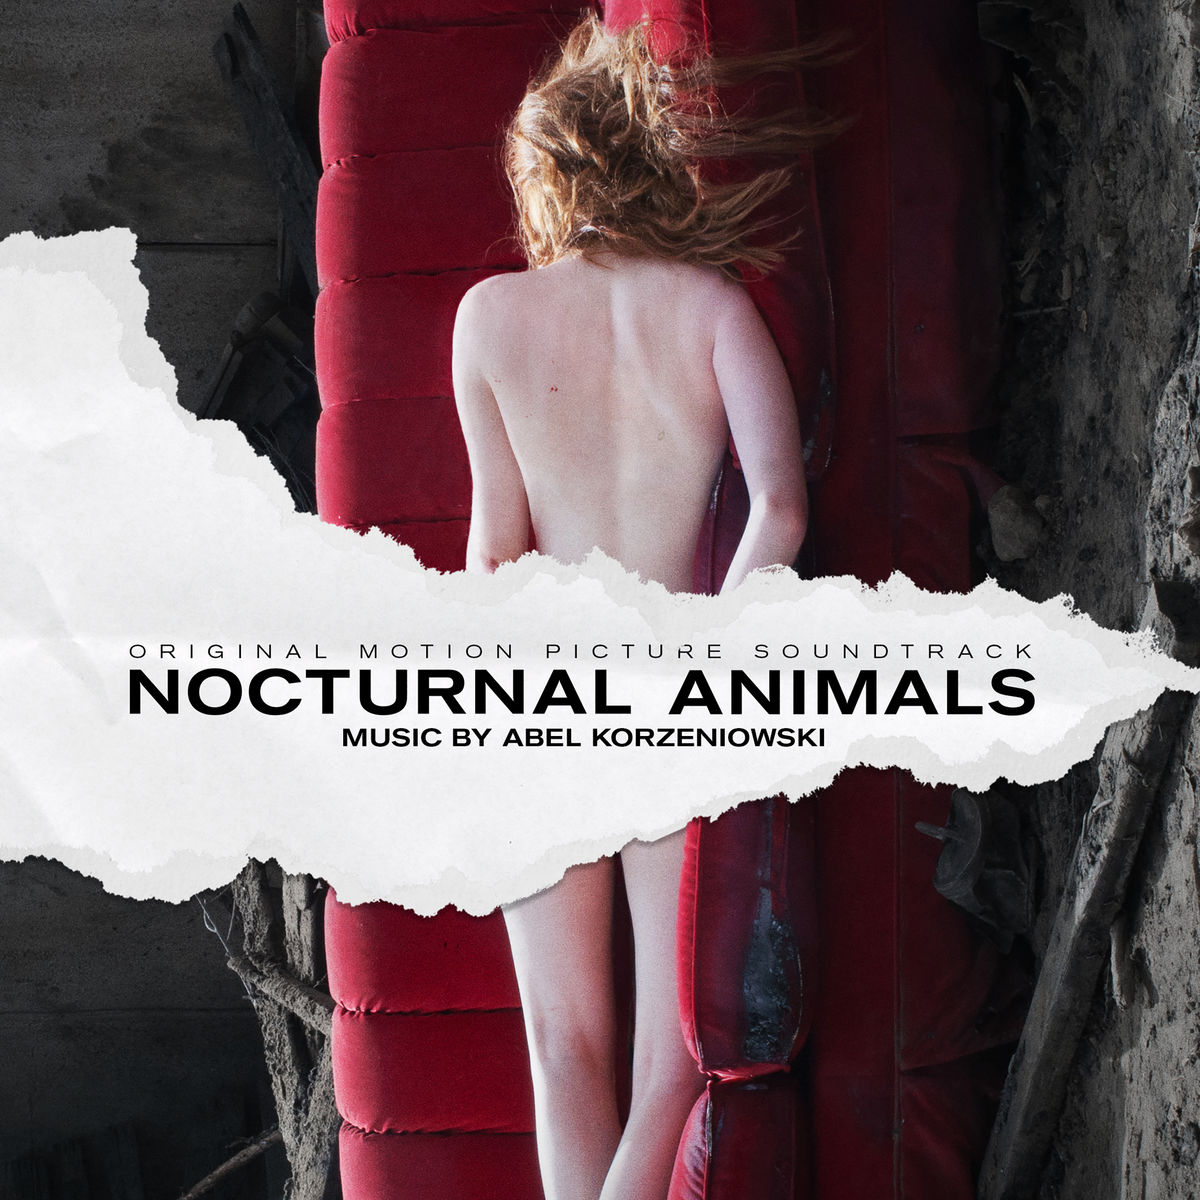 Nocturnal Animals (Original Motion Picture Soundtrack) : Abel Korzeniowski  : Free Download, Borrow, and Streaming : Internet Archive